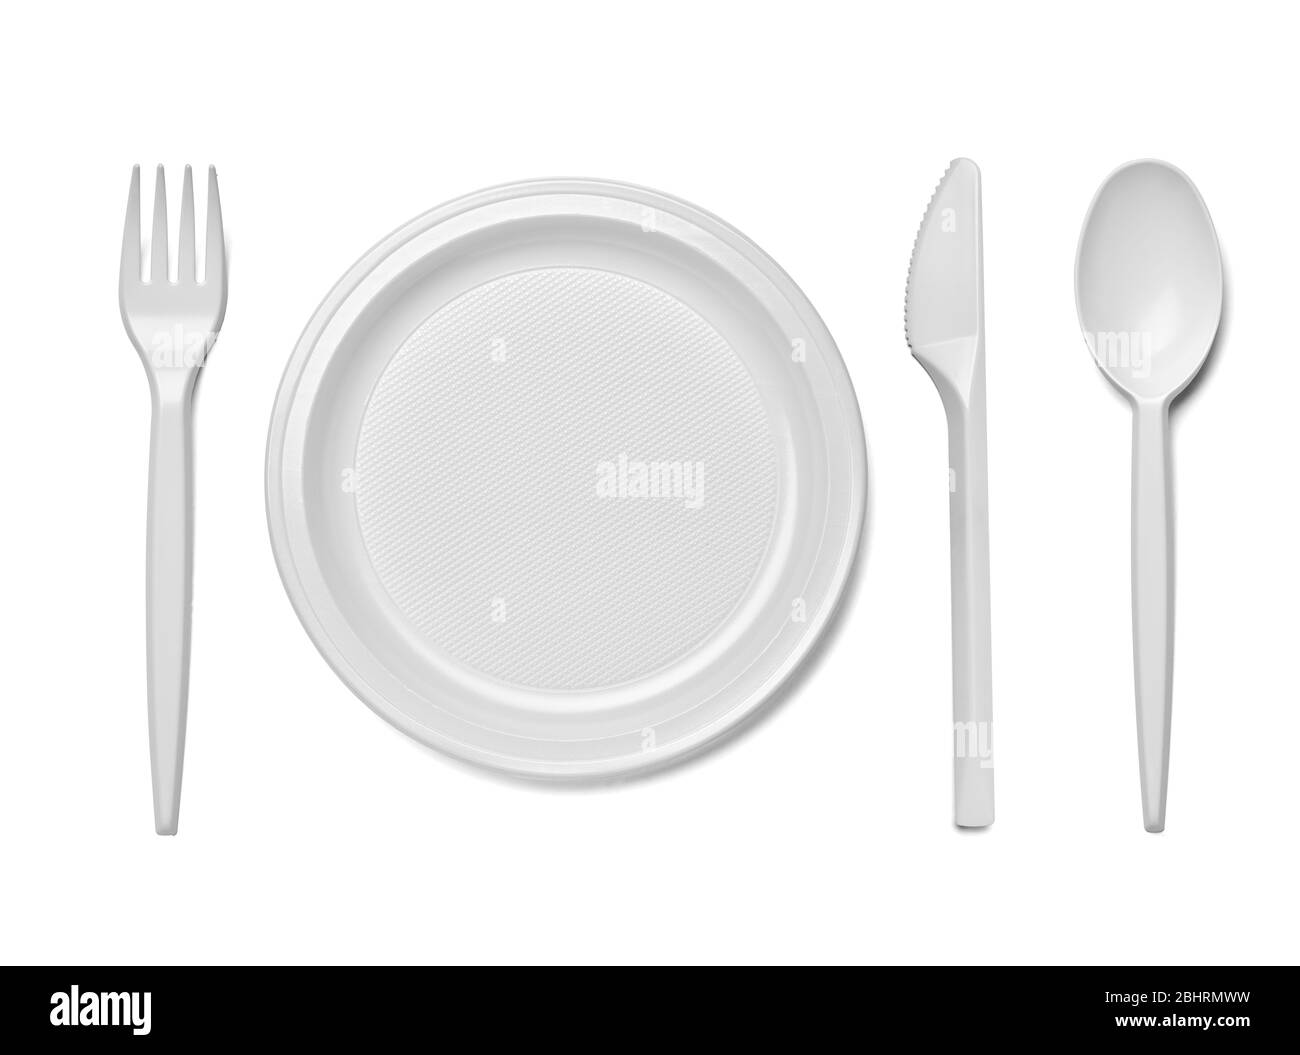 close up of plastic cutlery spoon, fork, knife and plate on white background Stock Photo